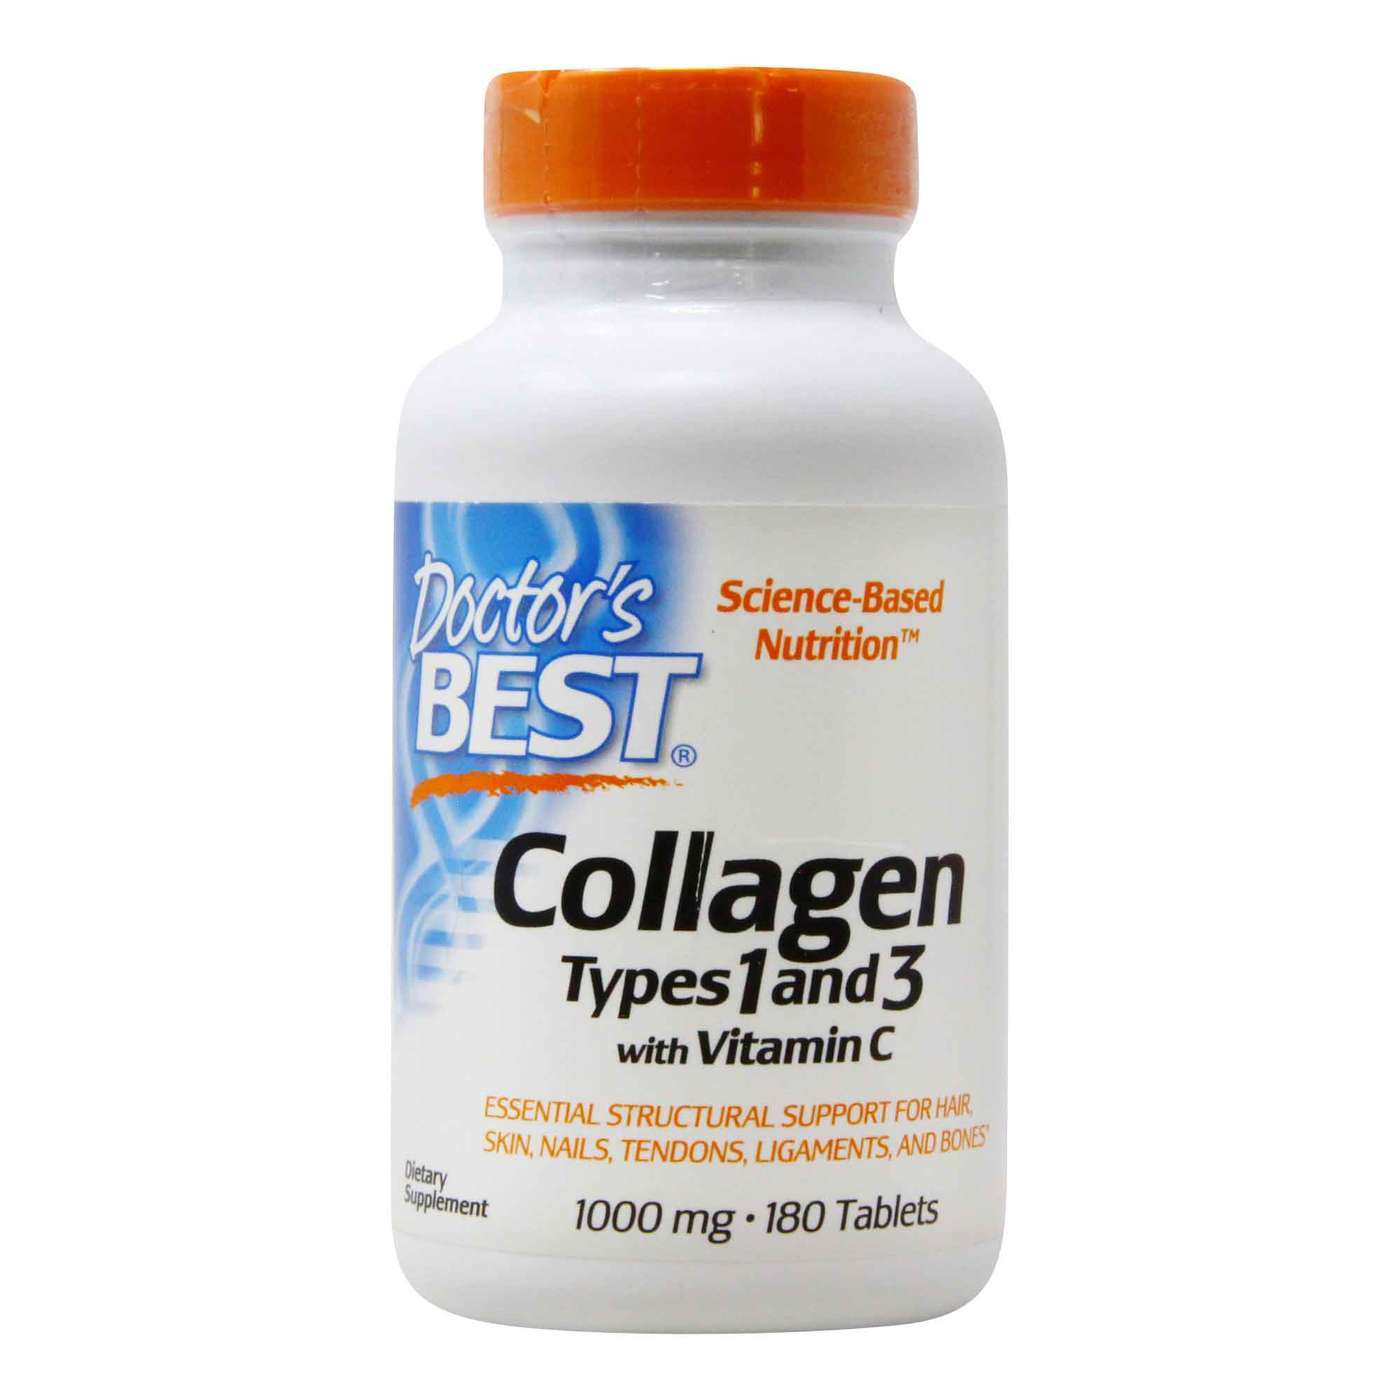 Doctor's Best Collagen Types 1 and 3 - 180 Tablets - eVitamins.com